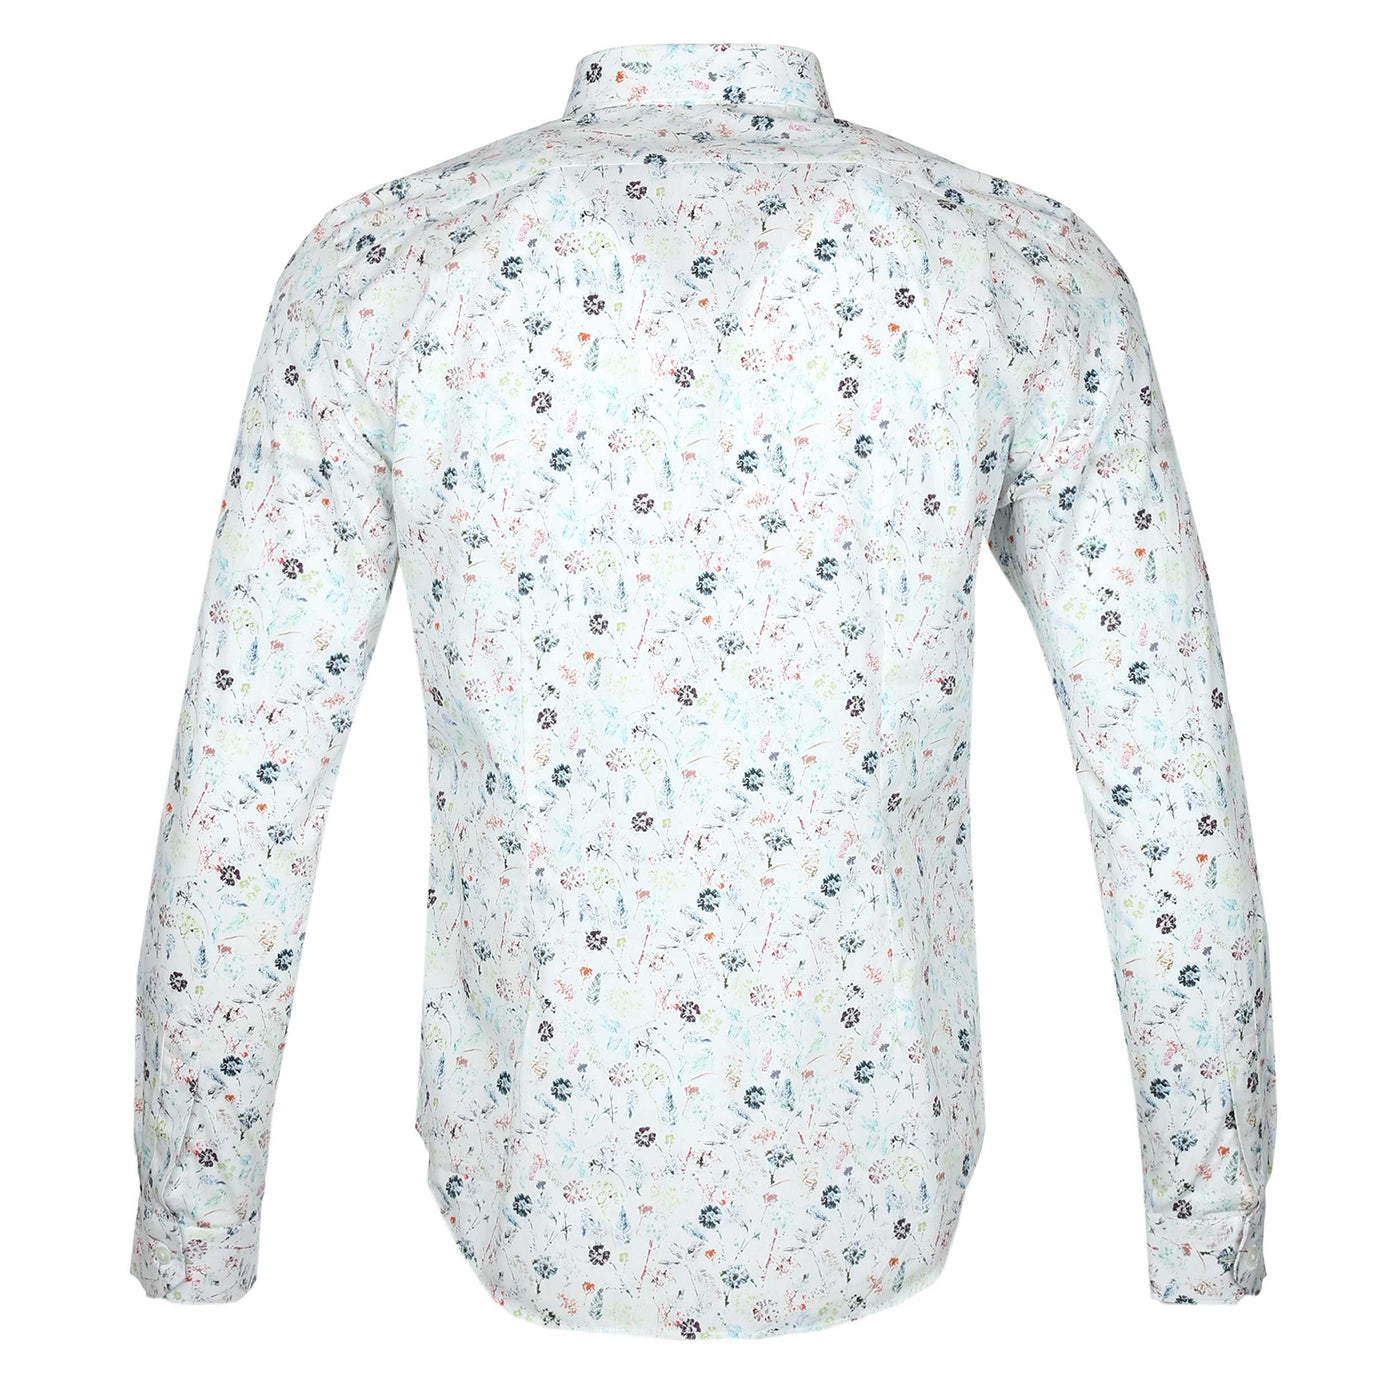 Paul Smith Floral Print Shirt in White Back